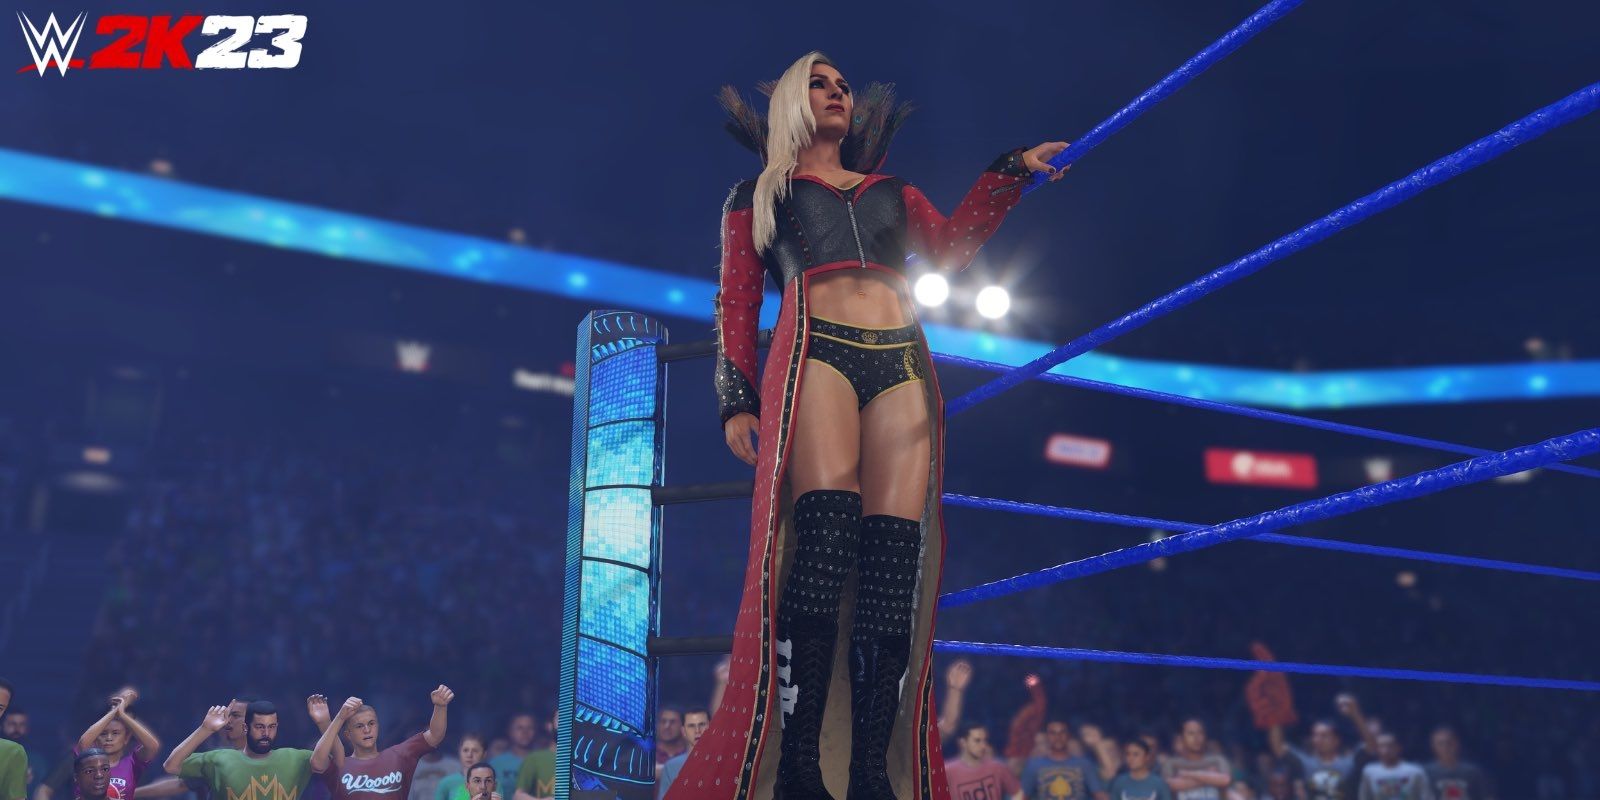 Charlotte Flair in 2k23